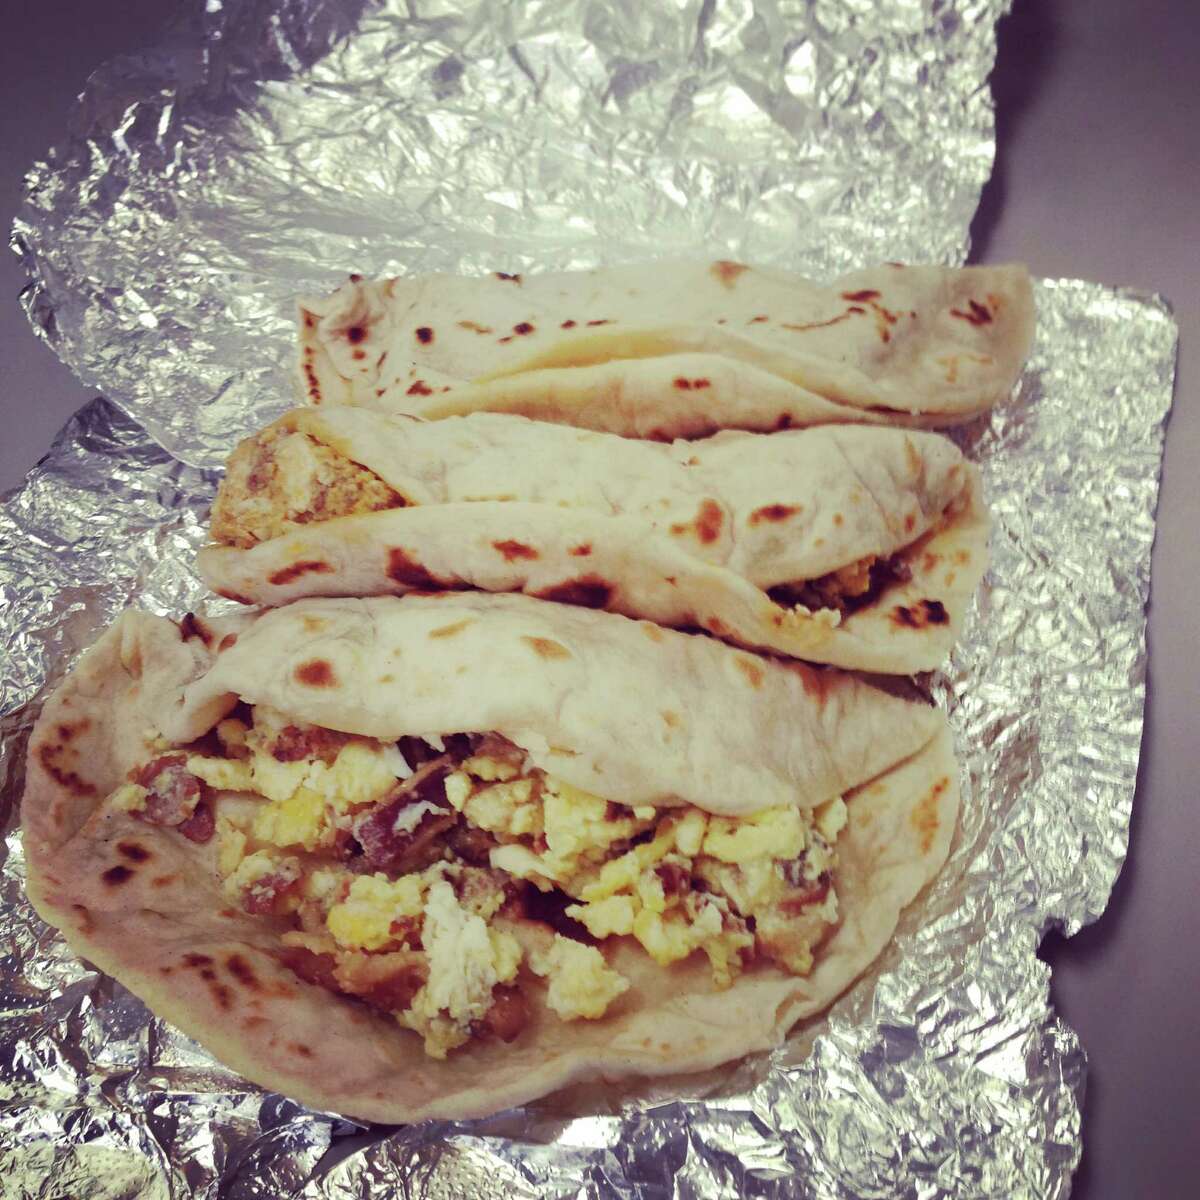 1. We can foil the foil  San Antonian breakfast taco lovers don't have to unwrap the aluminum foil to know what kind of taco lies beneath. All we have to do is give it a little feel and squeeze to know if it's a bacon and egg or bean and cheese.  Slighty squishy? That's a bacon and egg.  Very squishy? You've got yourself a bean and cheese. 